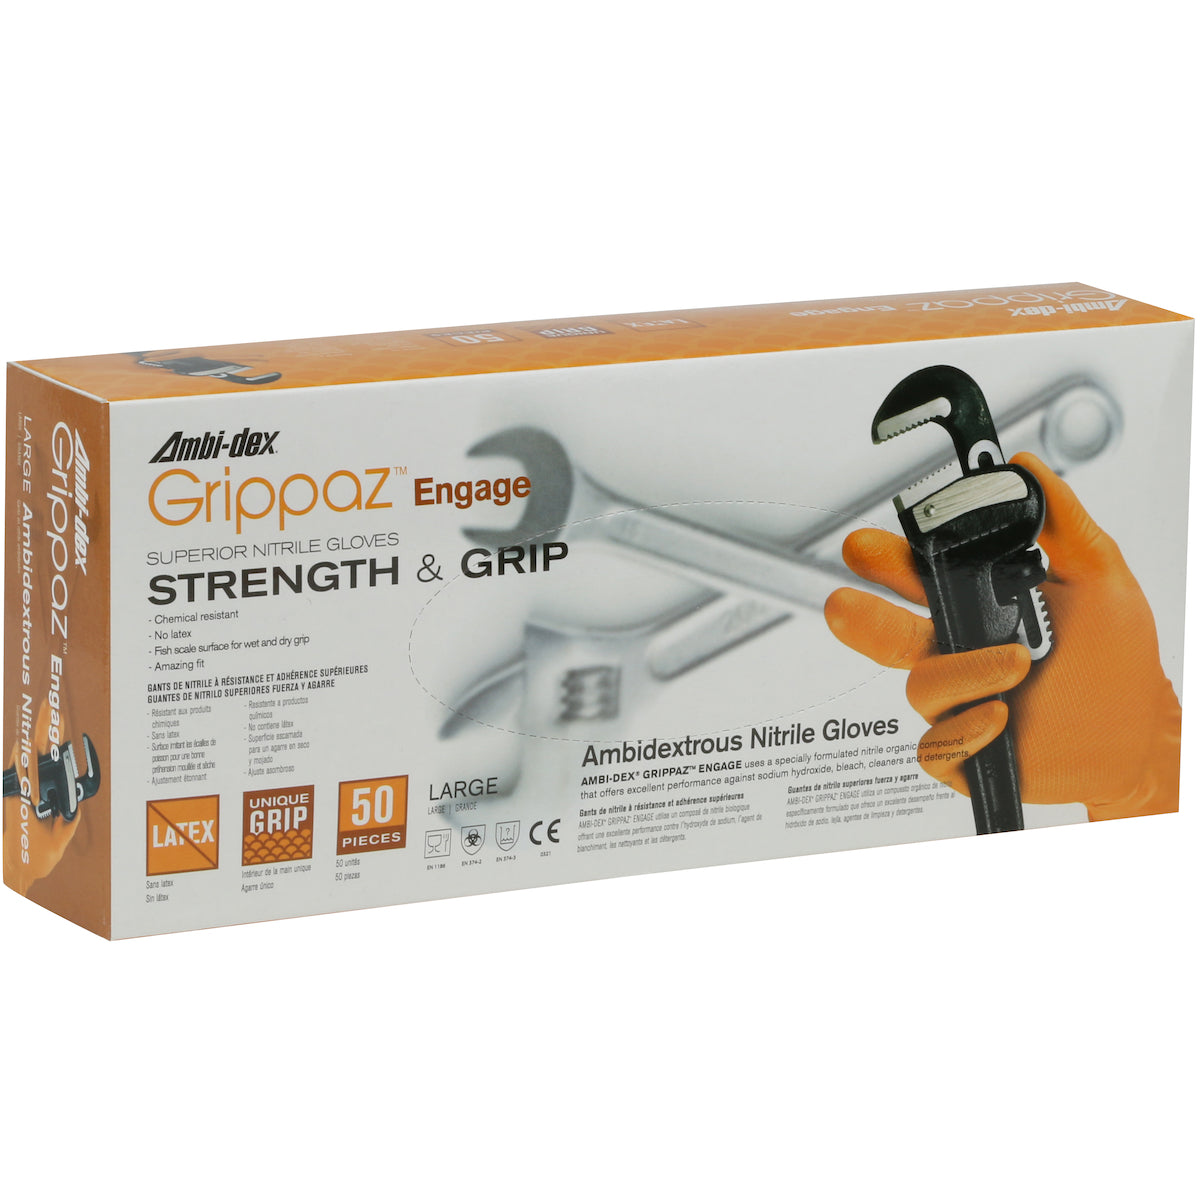 Grippaz 67-307/3XL Extended Use Ambidextrous Nitrile Glove with Textured Fish Scale Grip - 7 Mil